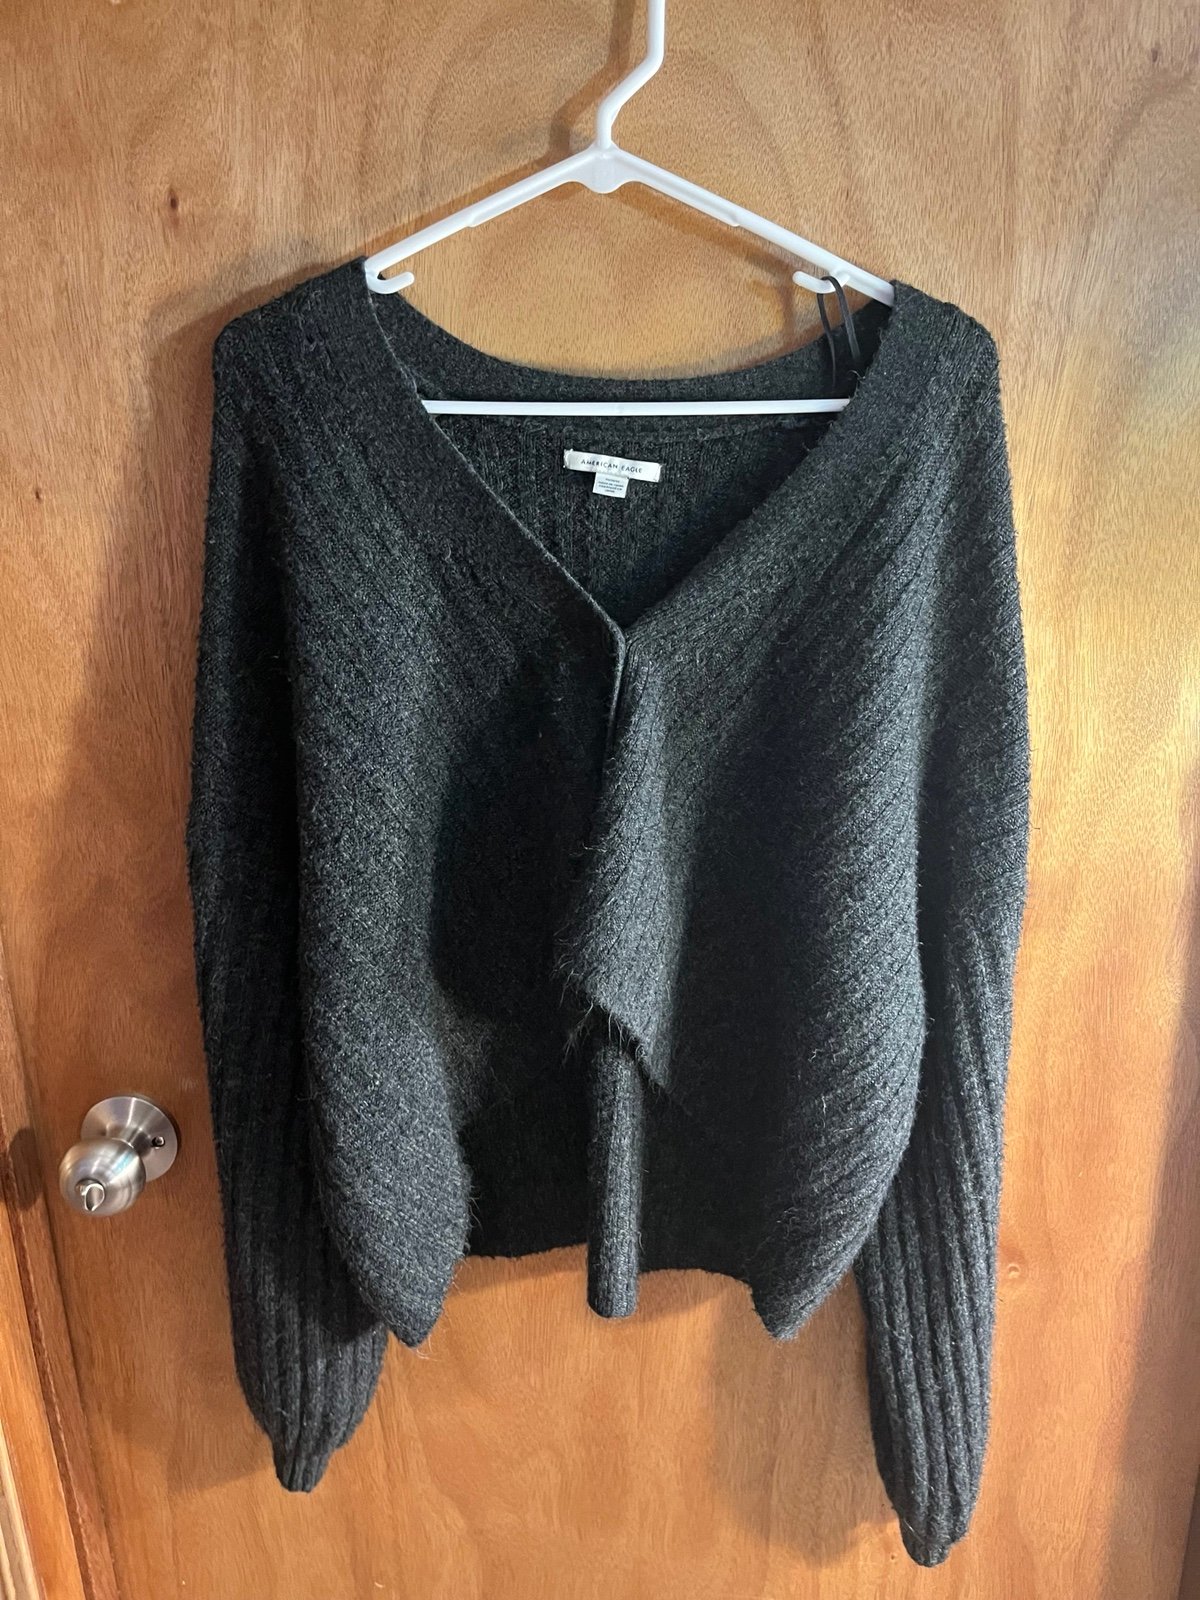 Classic american eagle soft and sexy sweater mrzYVquQ1 